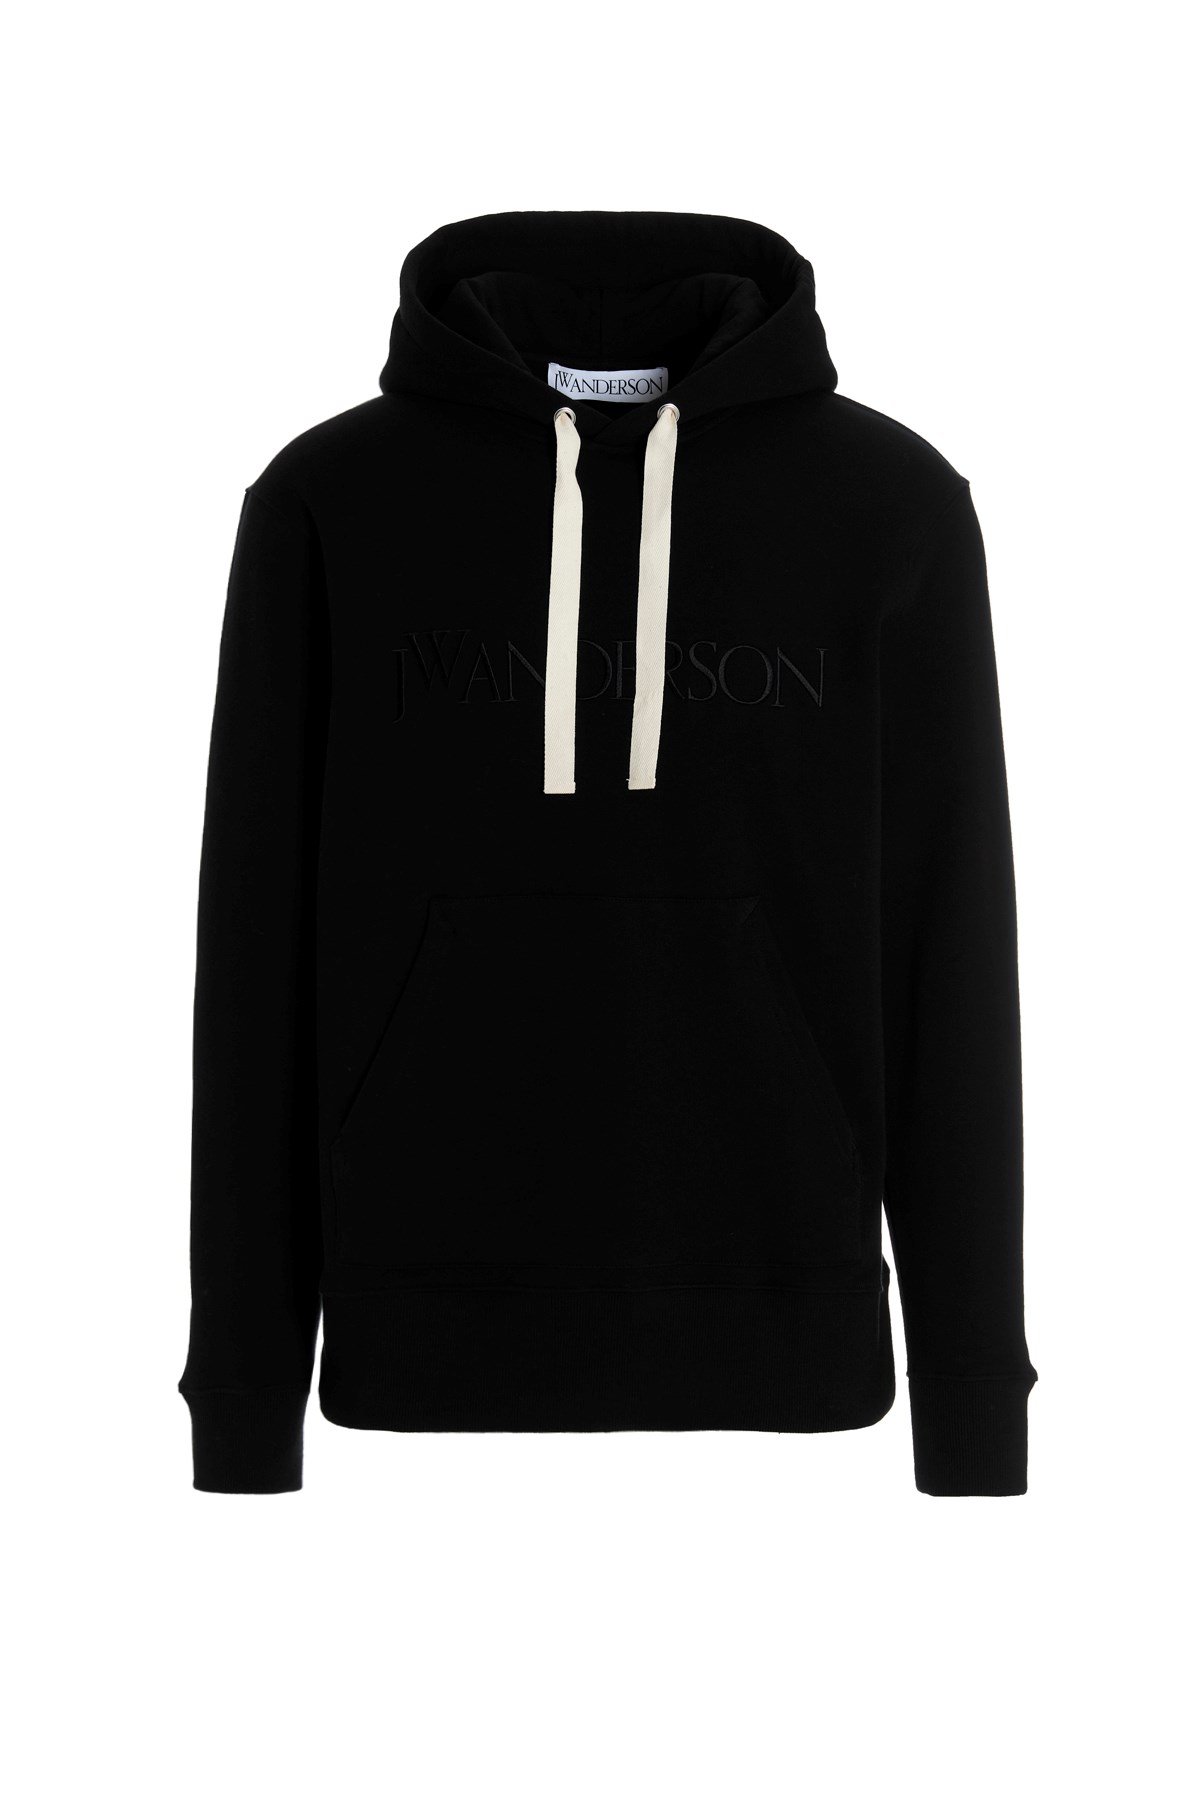 J.W.ANDERSON Logo Embroidery Hoodie